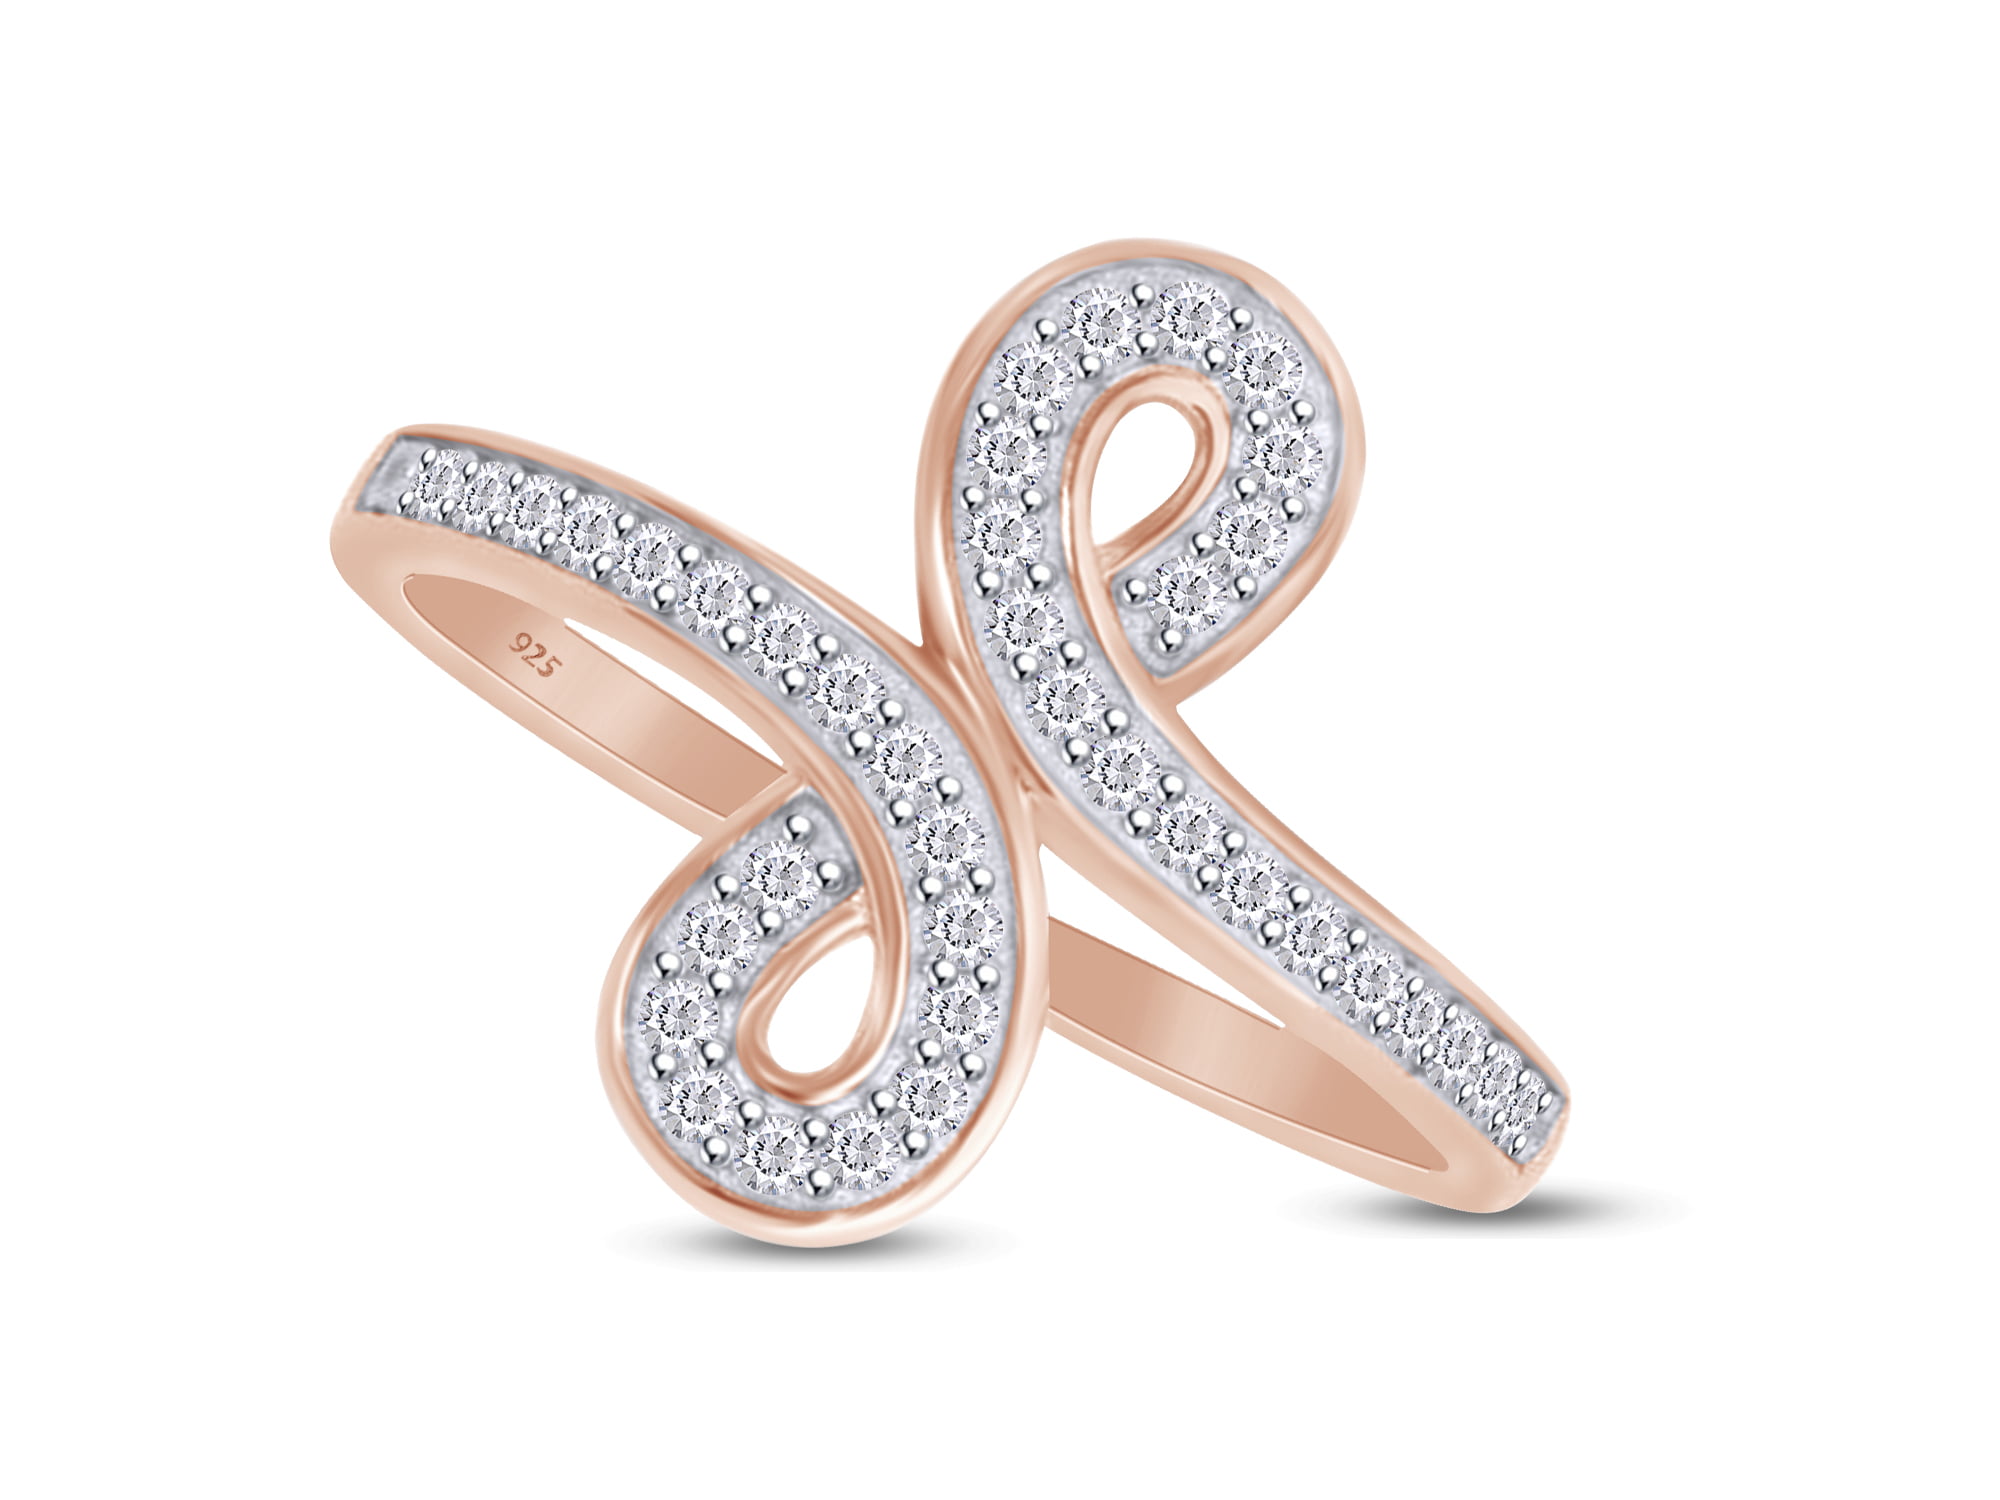 Wishrocks Round Cut White Cubic Zirconia Cluster Ring in 14K Rose Gold Over Sterling Silver